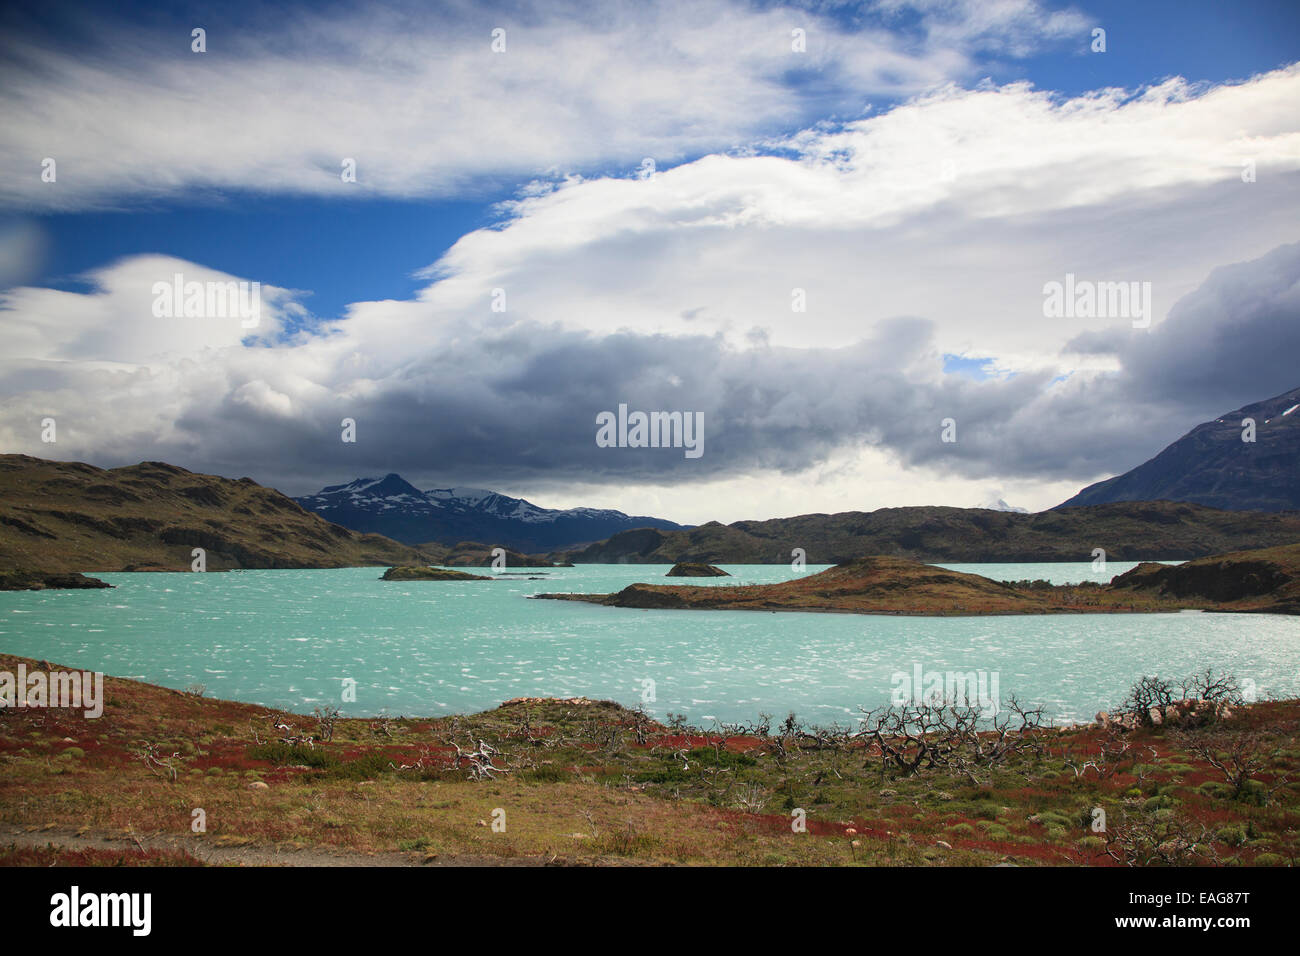 Lake, Torres Del Paine National Park, Chile Stock Photo